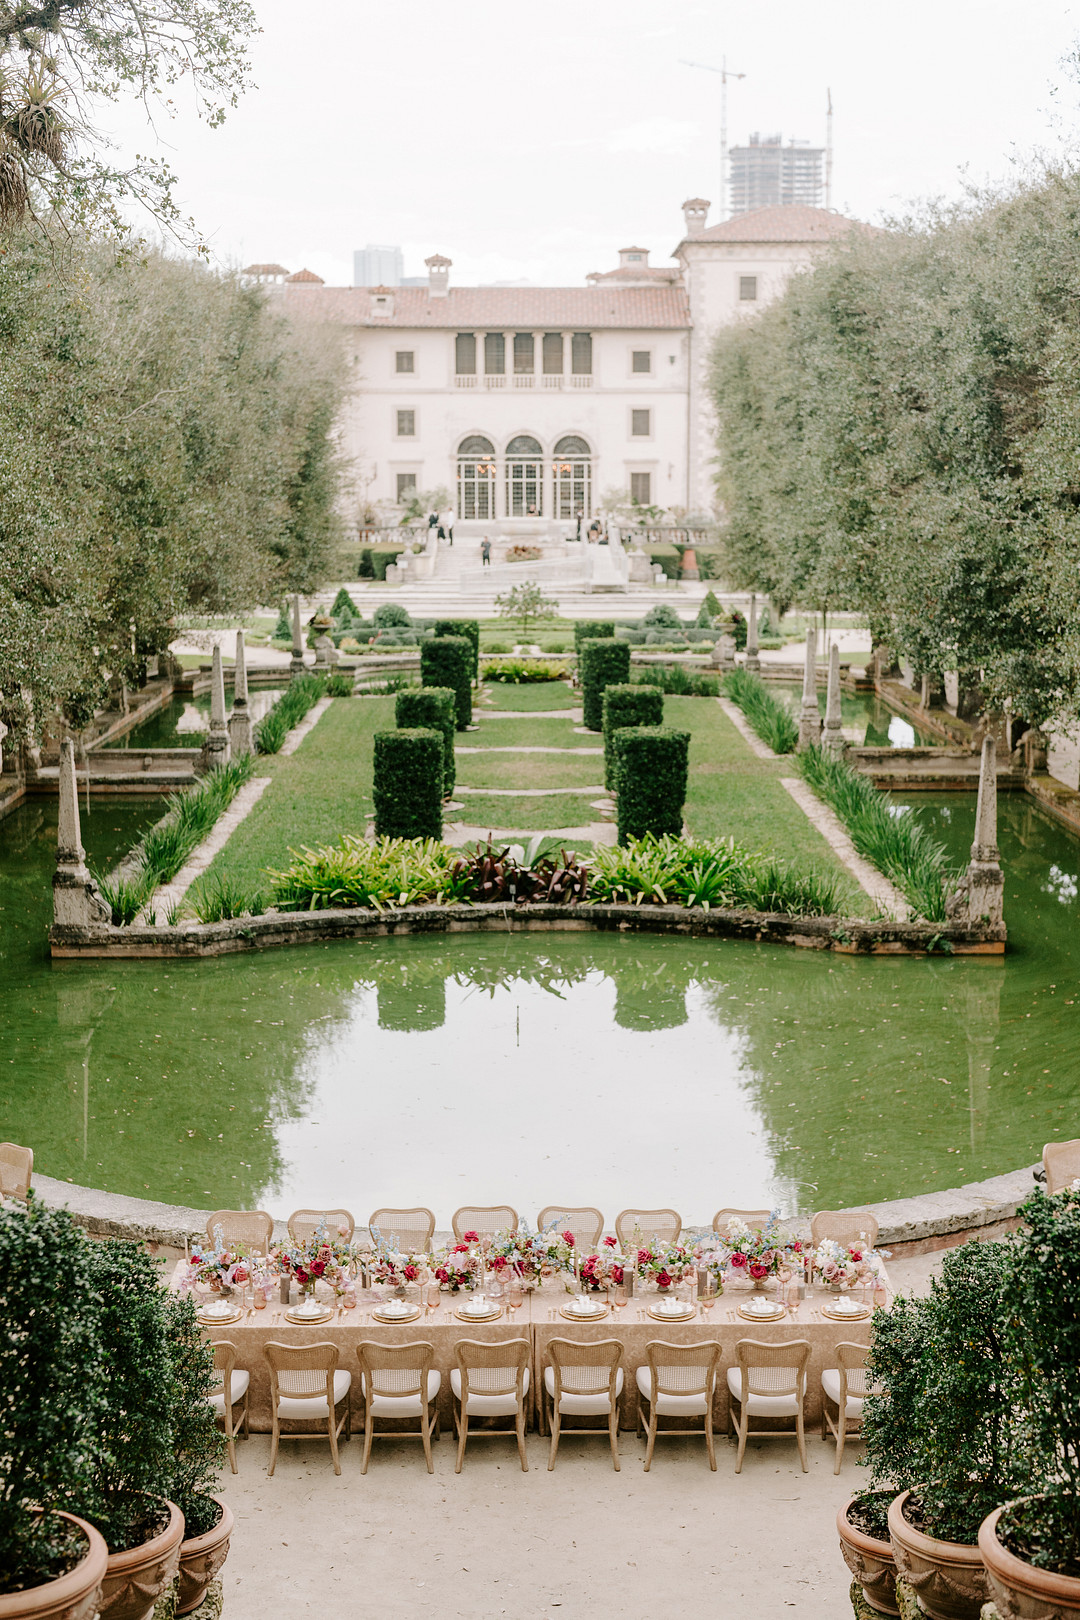 A long wedding reception table with white tablecloths and floral centerpieces set in front of a grand mansion with a pond in the background.